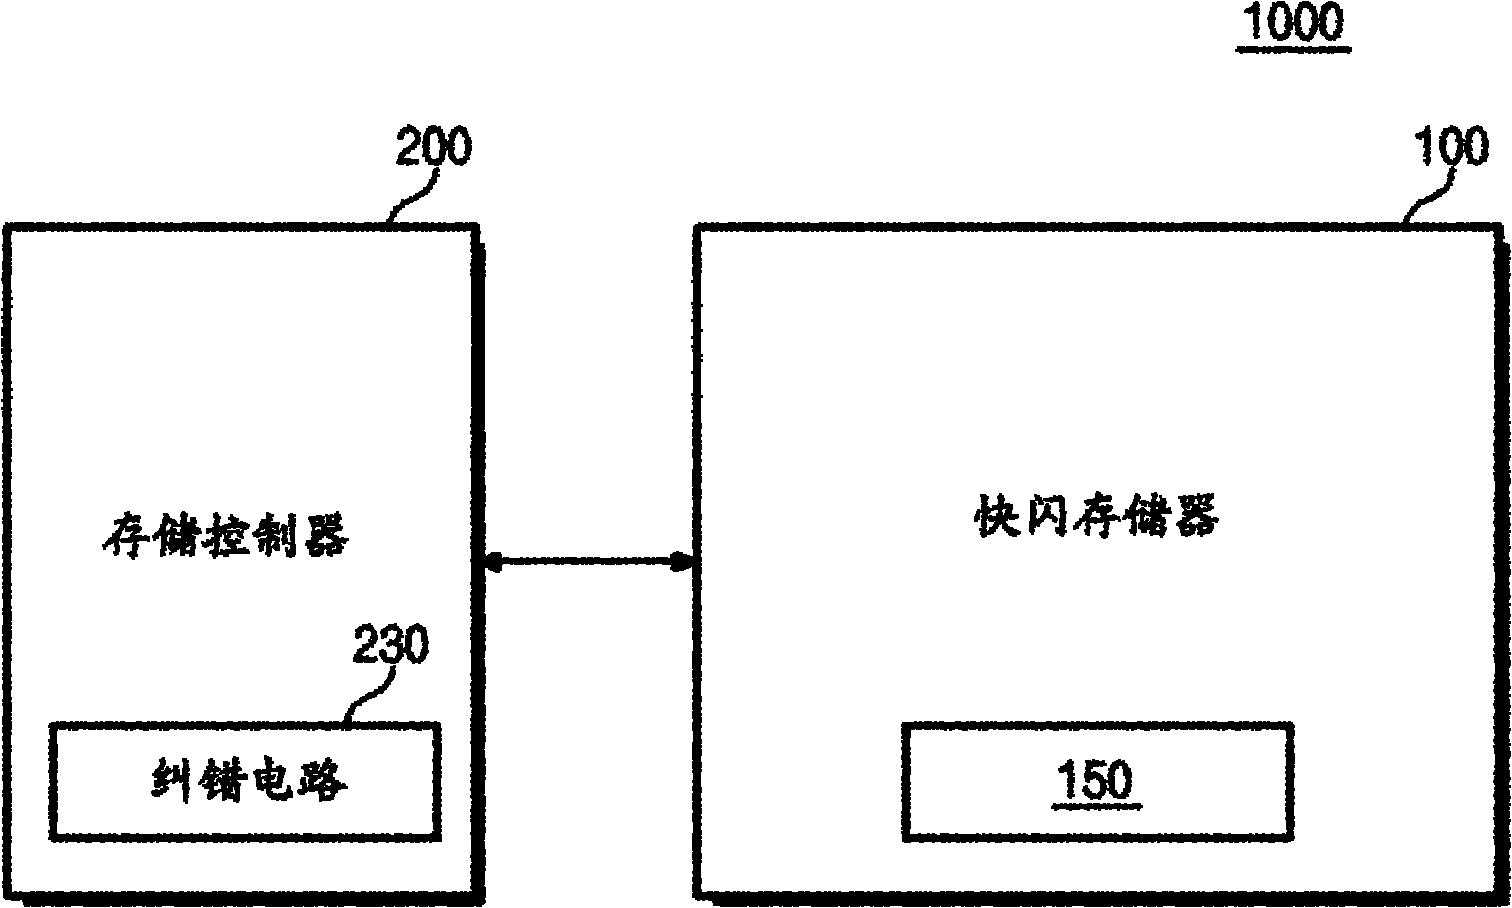 Flash memory devices having multi-bit memory cells therein with improved read reliability